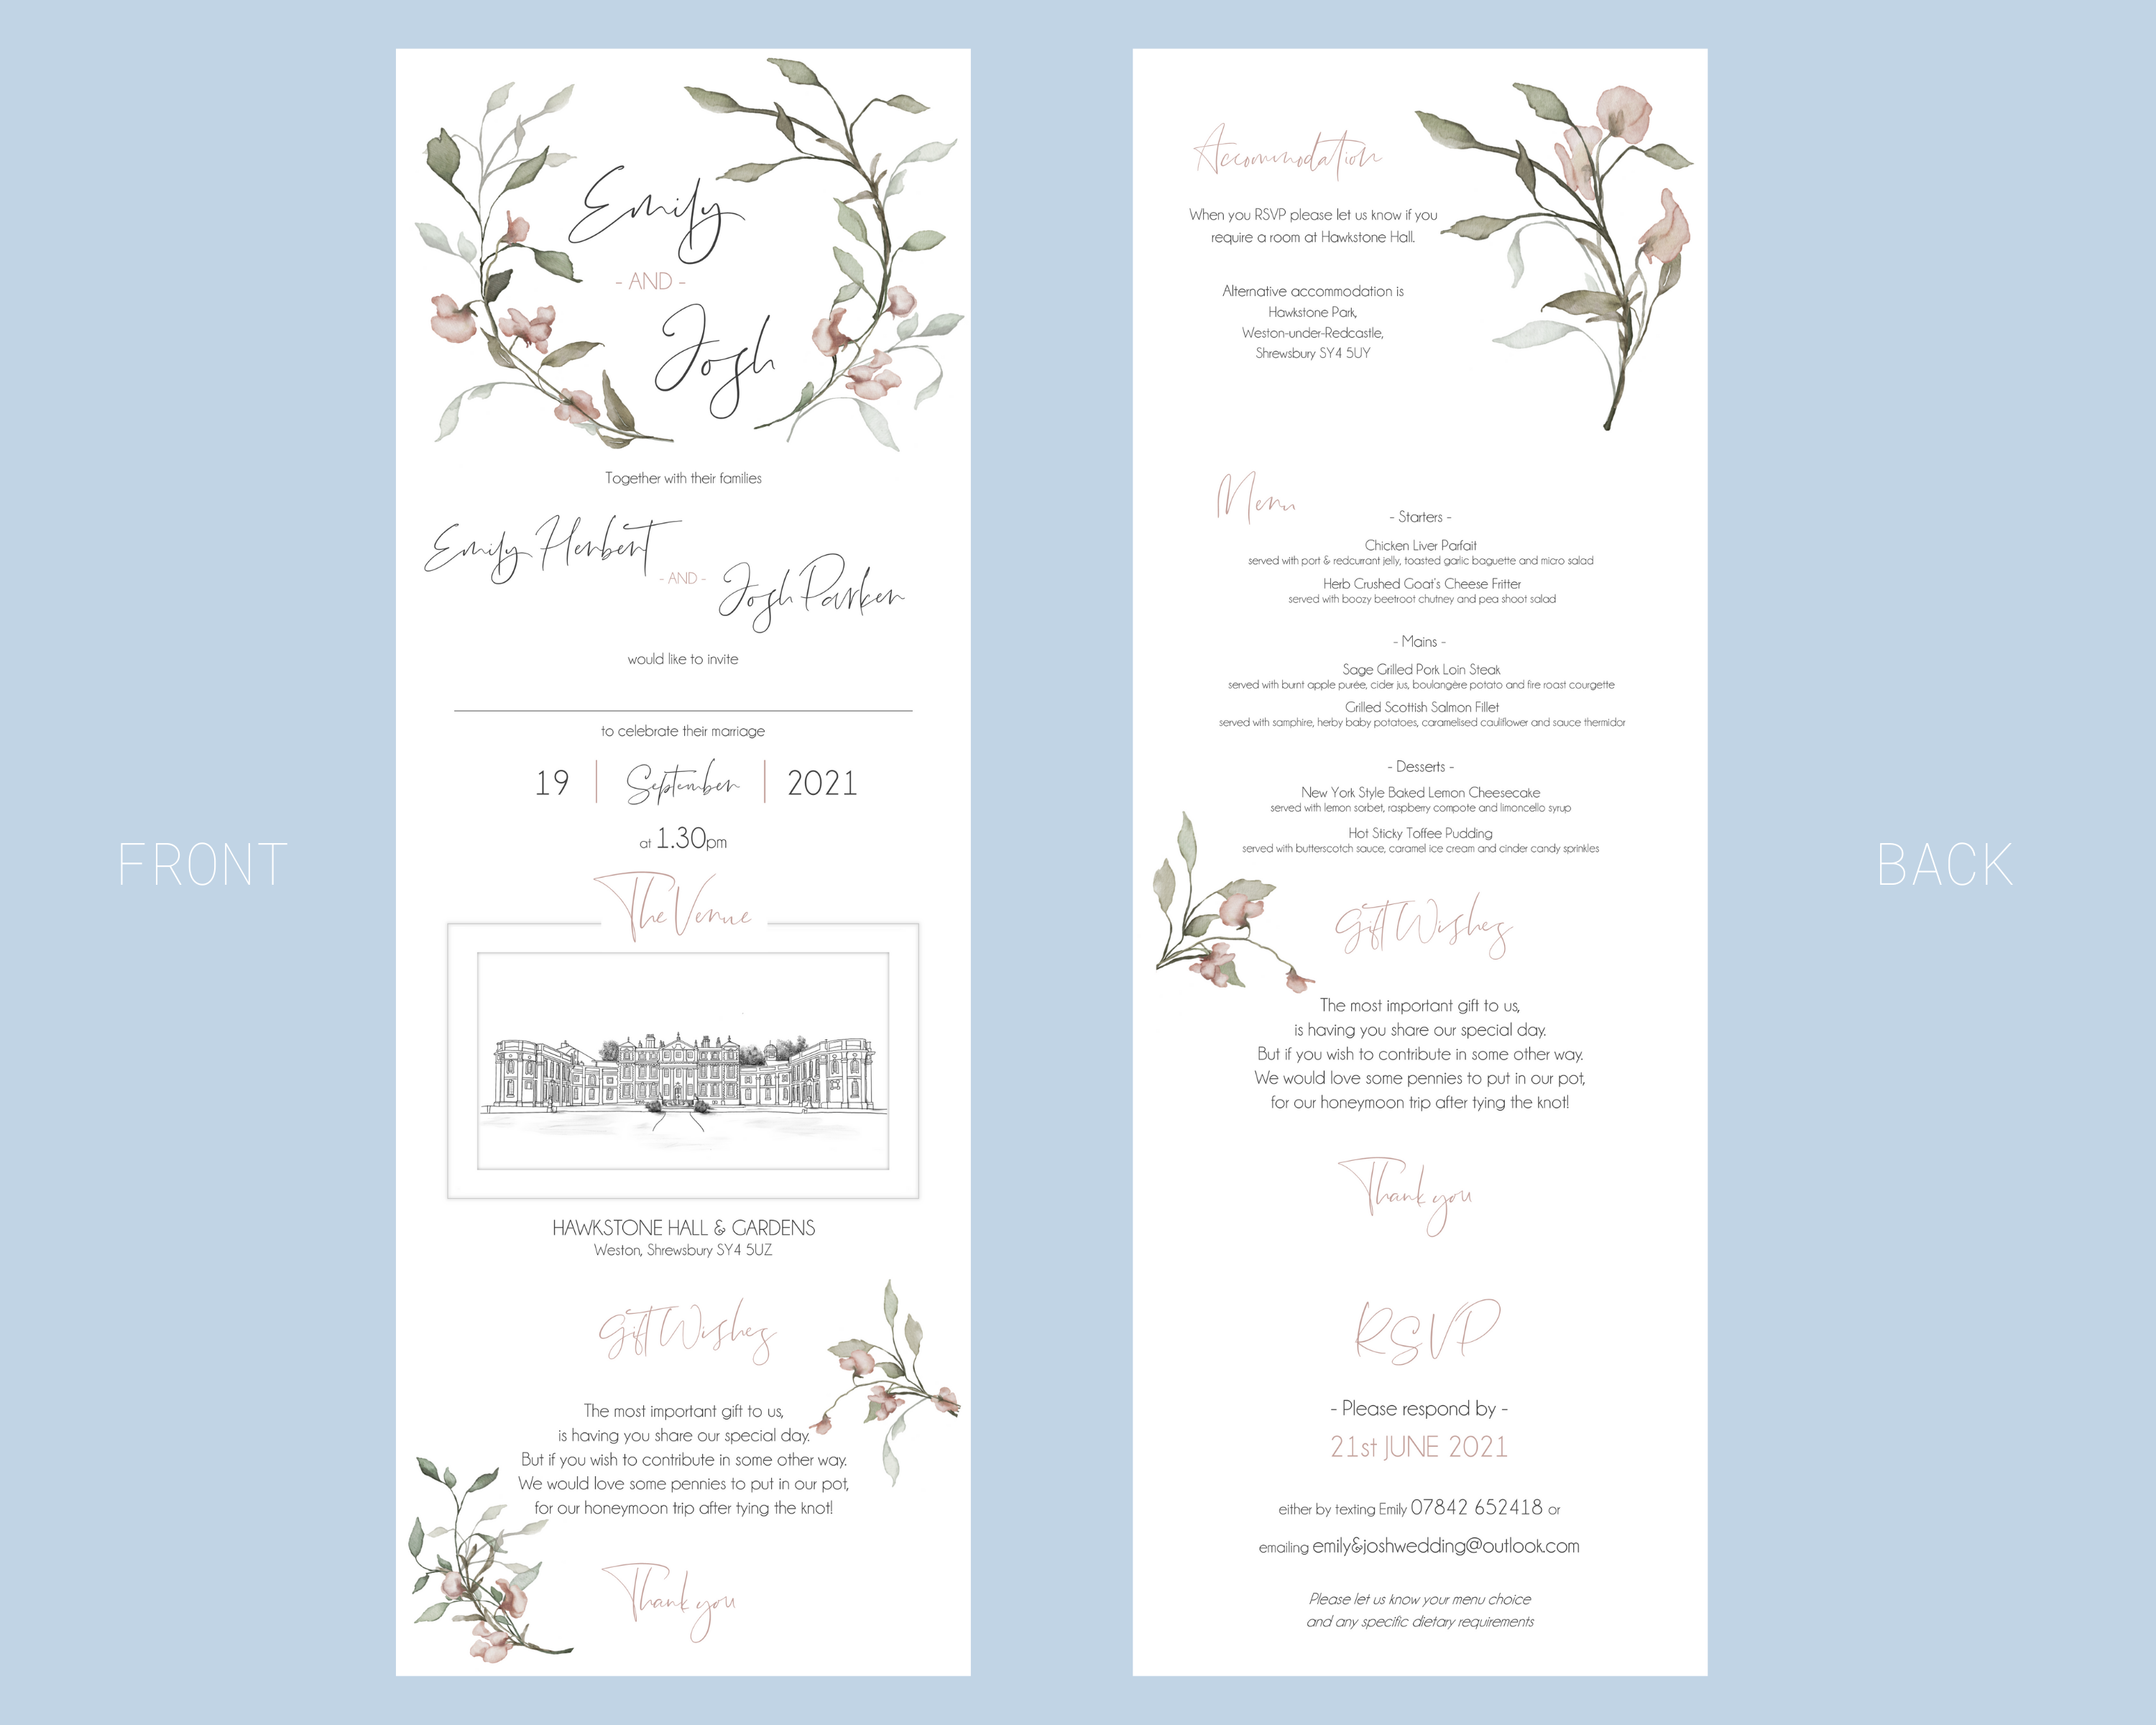 Watercolour Pink Flowers A6 Poppleberry accordion fold all-in-one wedding invitation, design front & back.